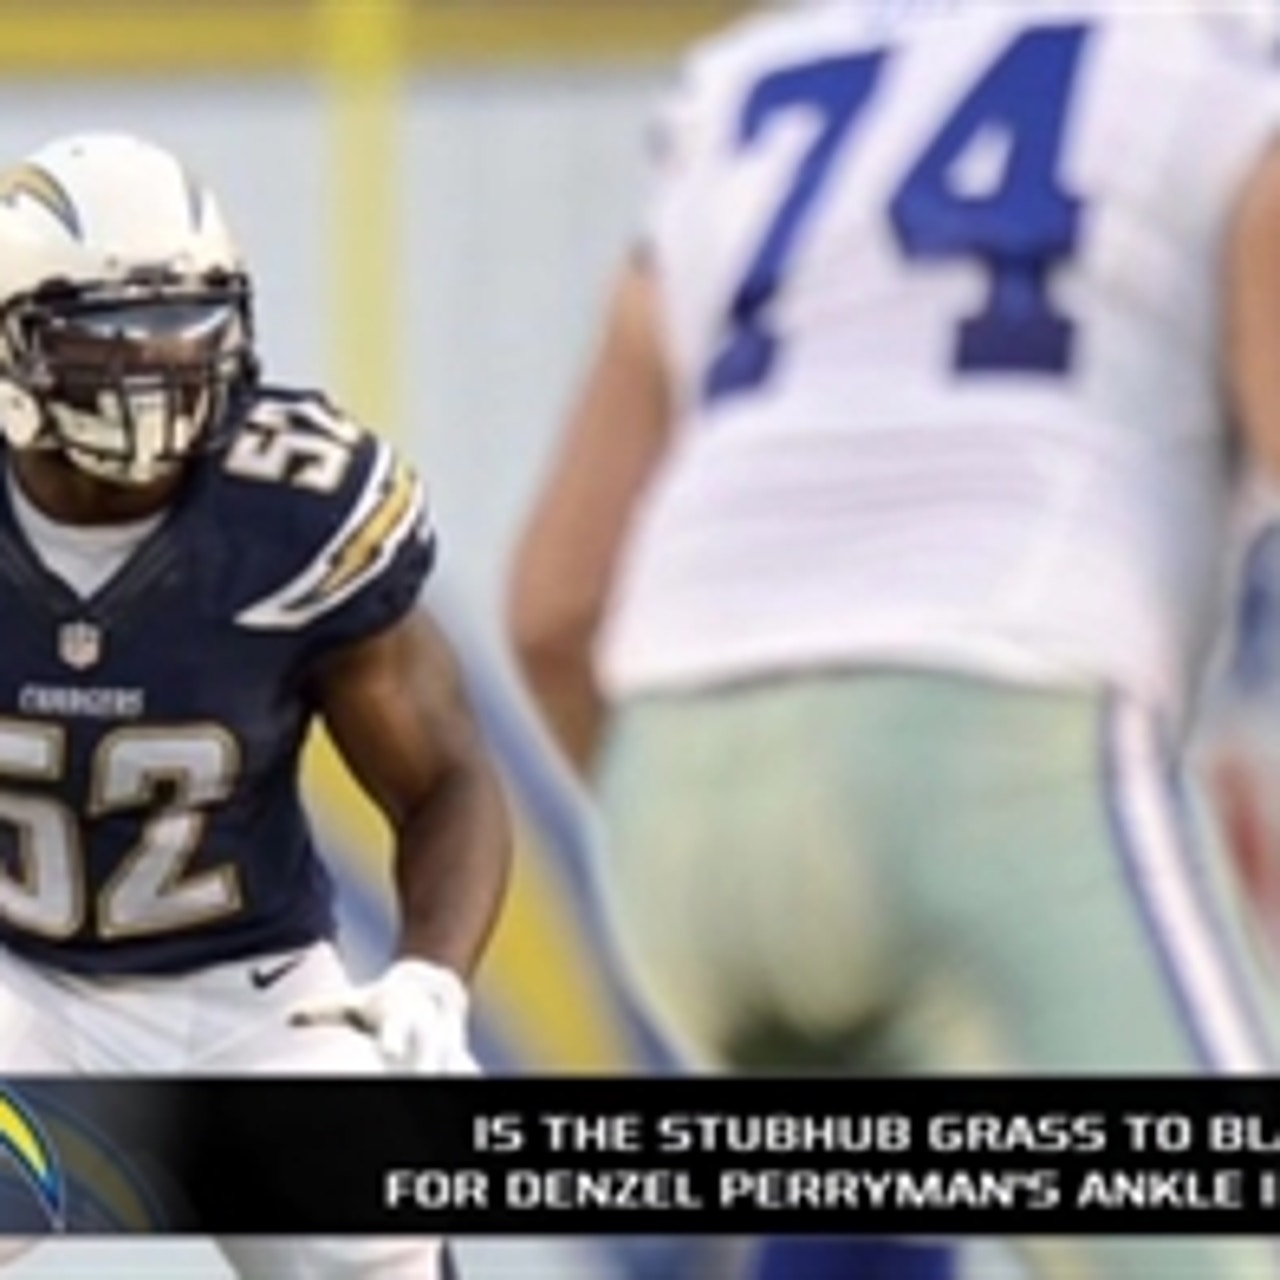 Did StubHub Center's grass play a role in Denzel Perryman's ankle injury?